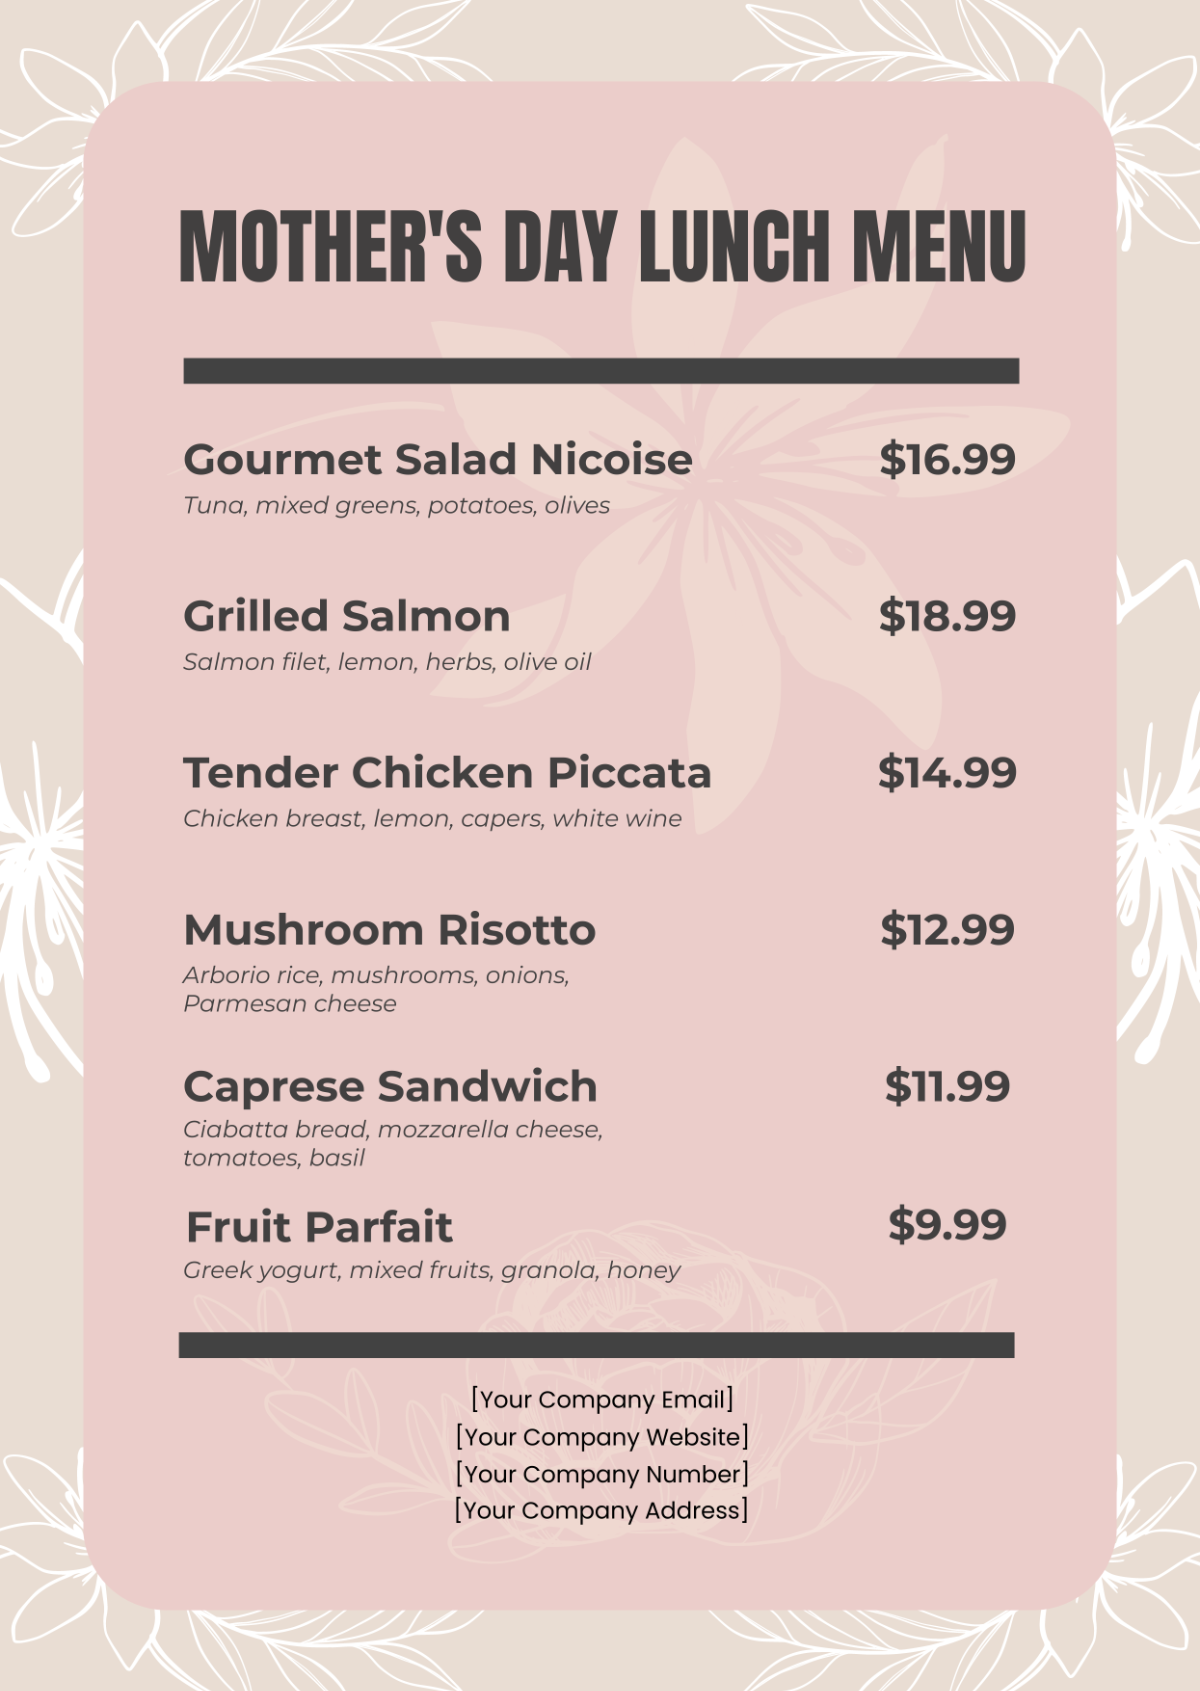 Free Mother's Day Lunch Menu Template